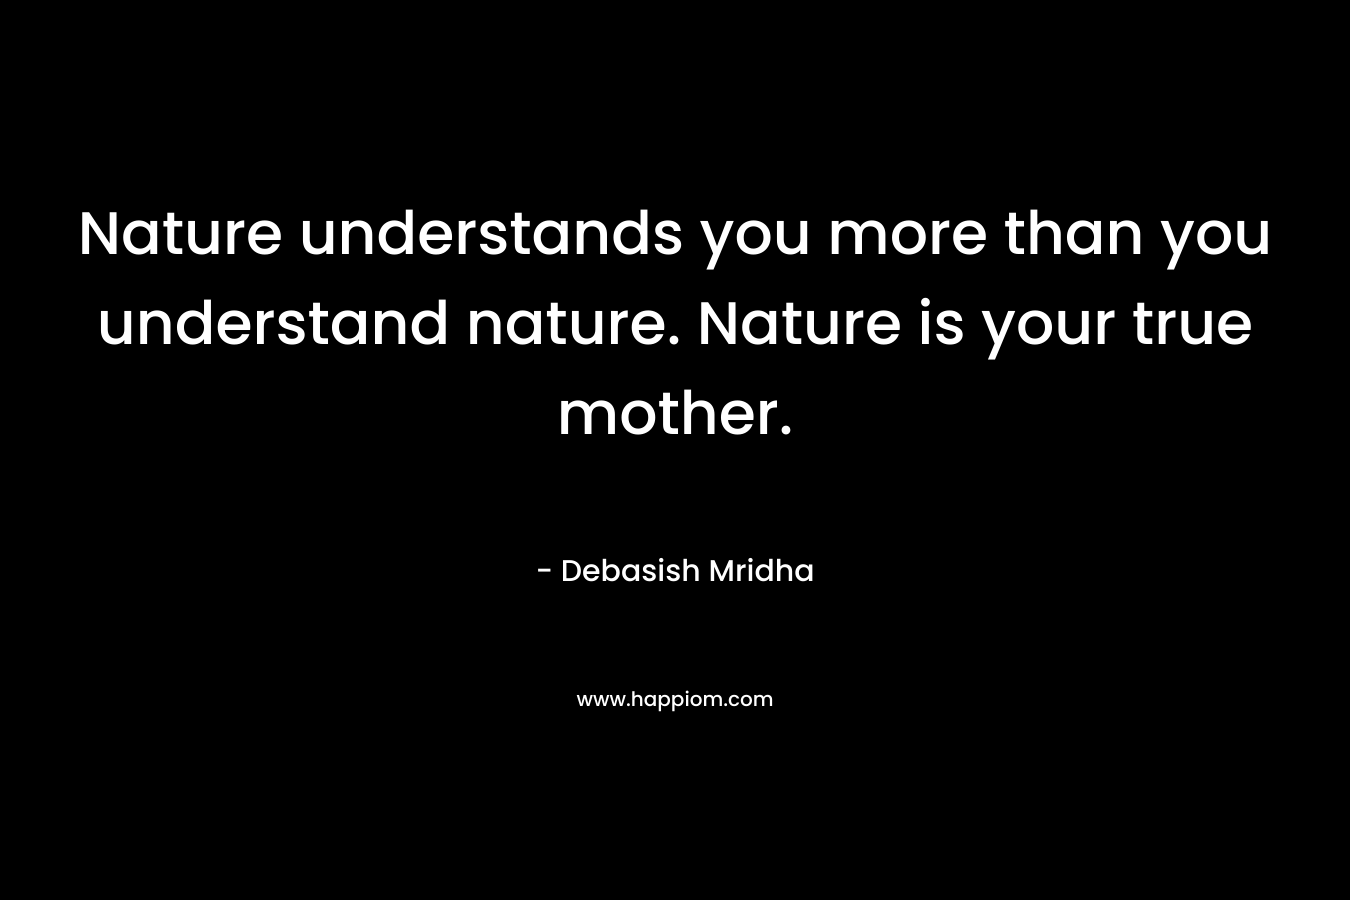 Nature understands you more than you understand nature. Nature is your true mother.